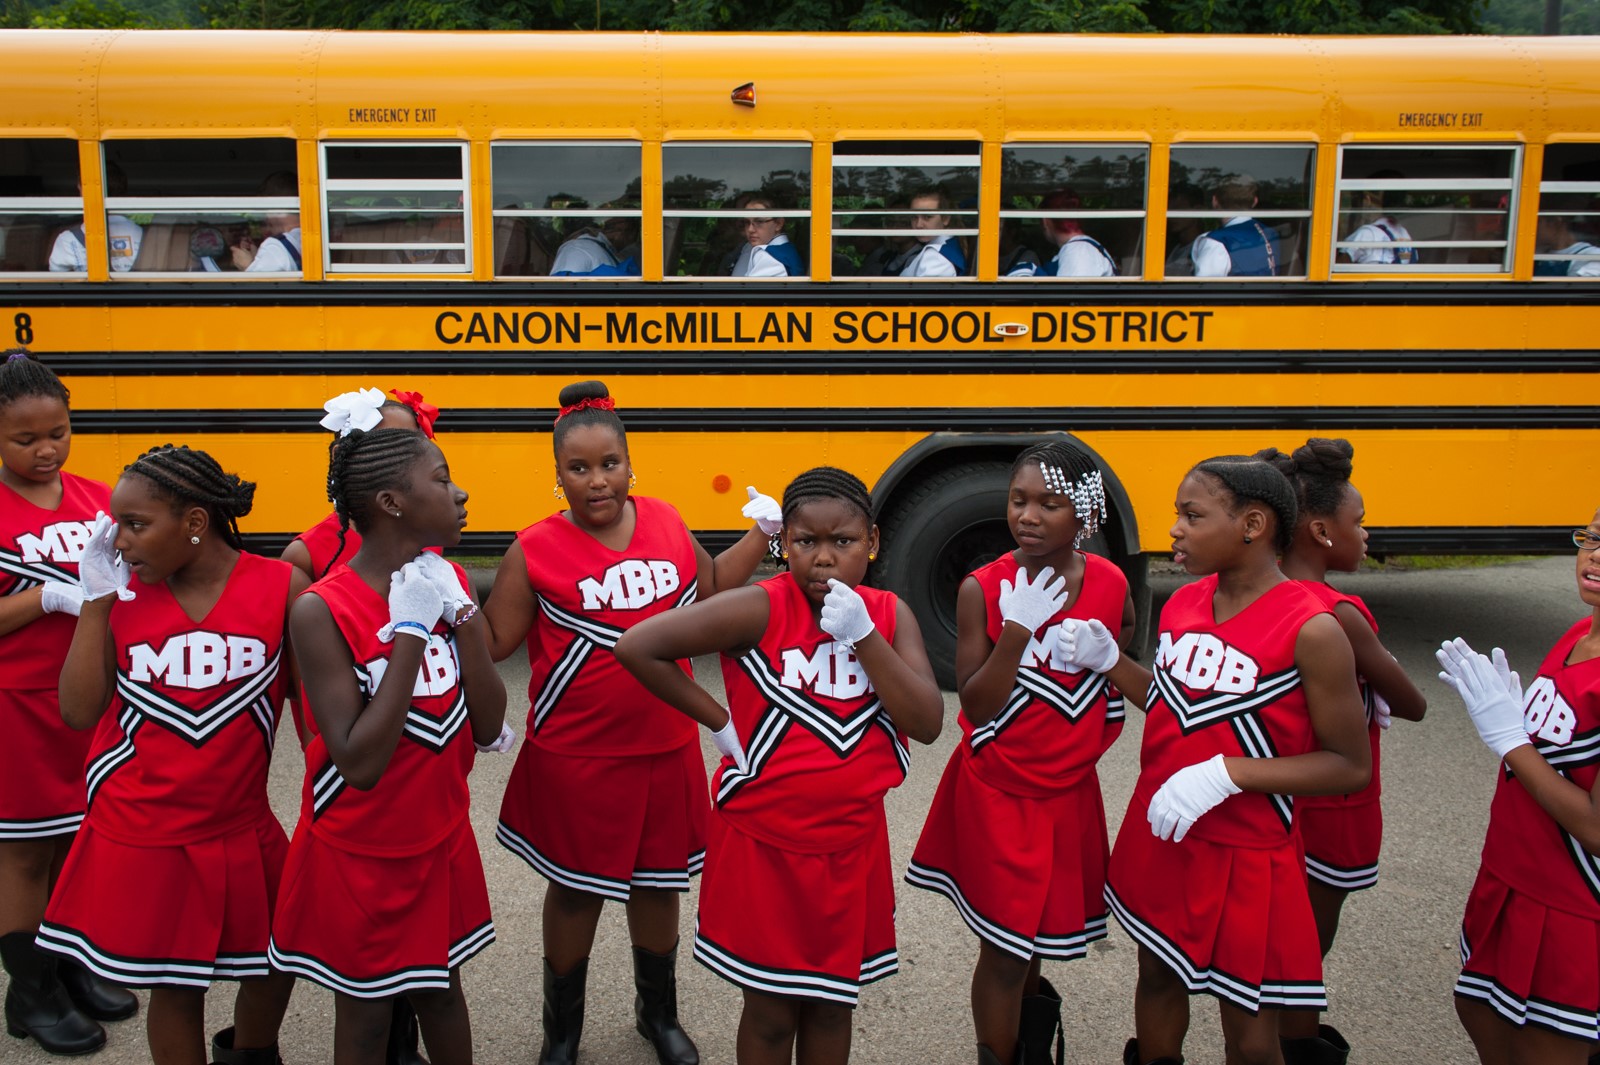 Young cheerleaders pose in front of a school bus.